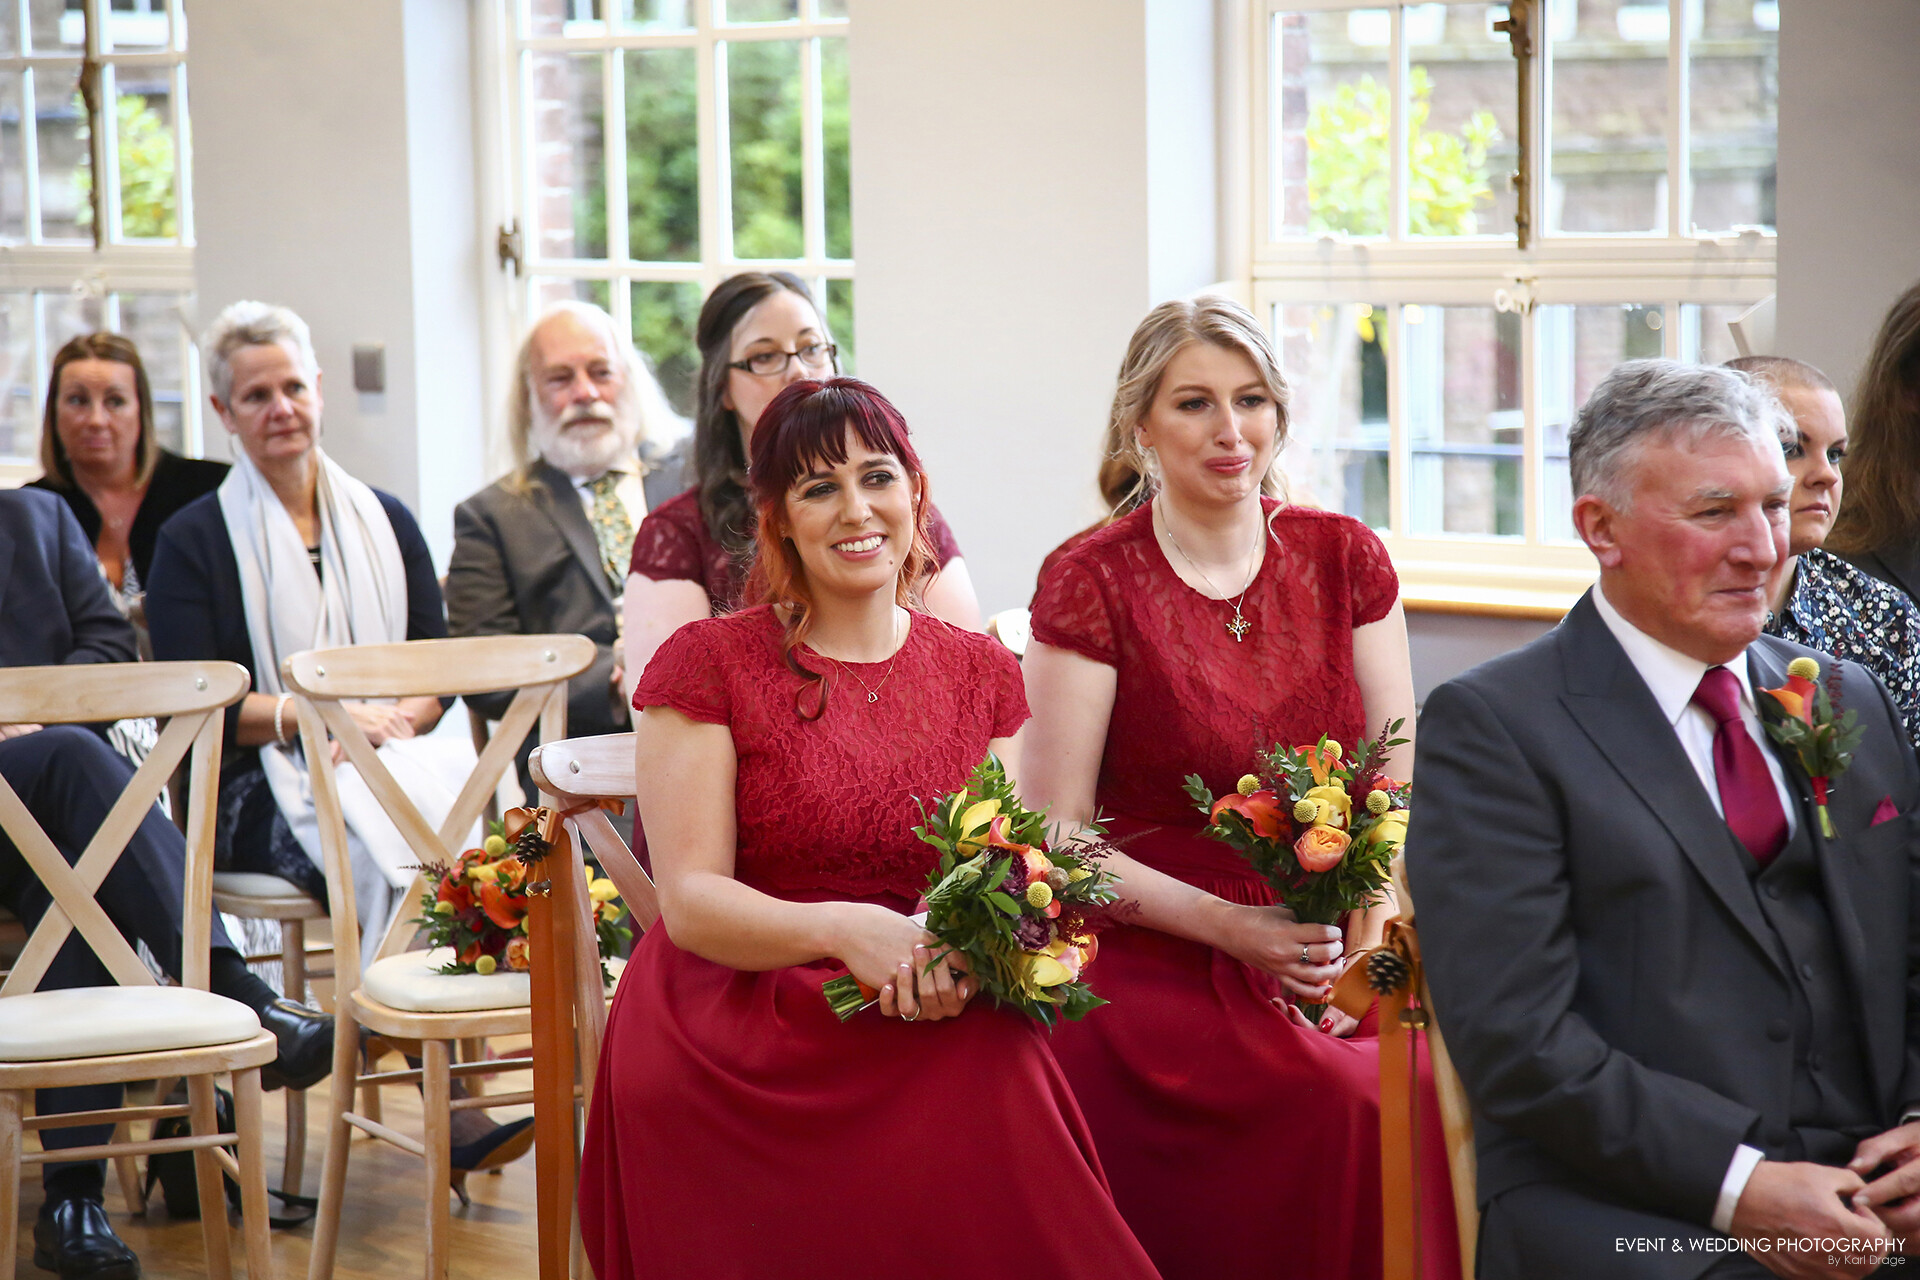 Guests look on intently during a wedding ceremony